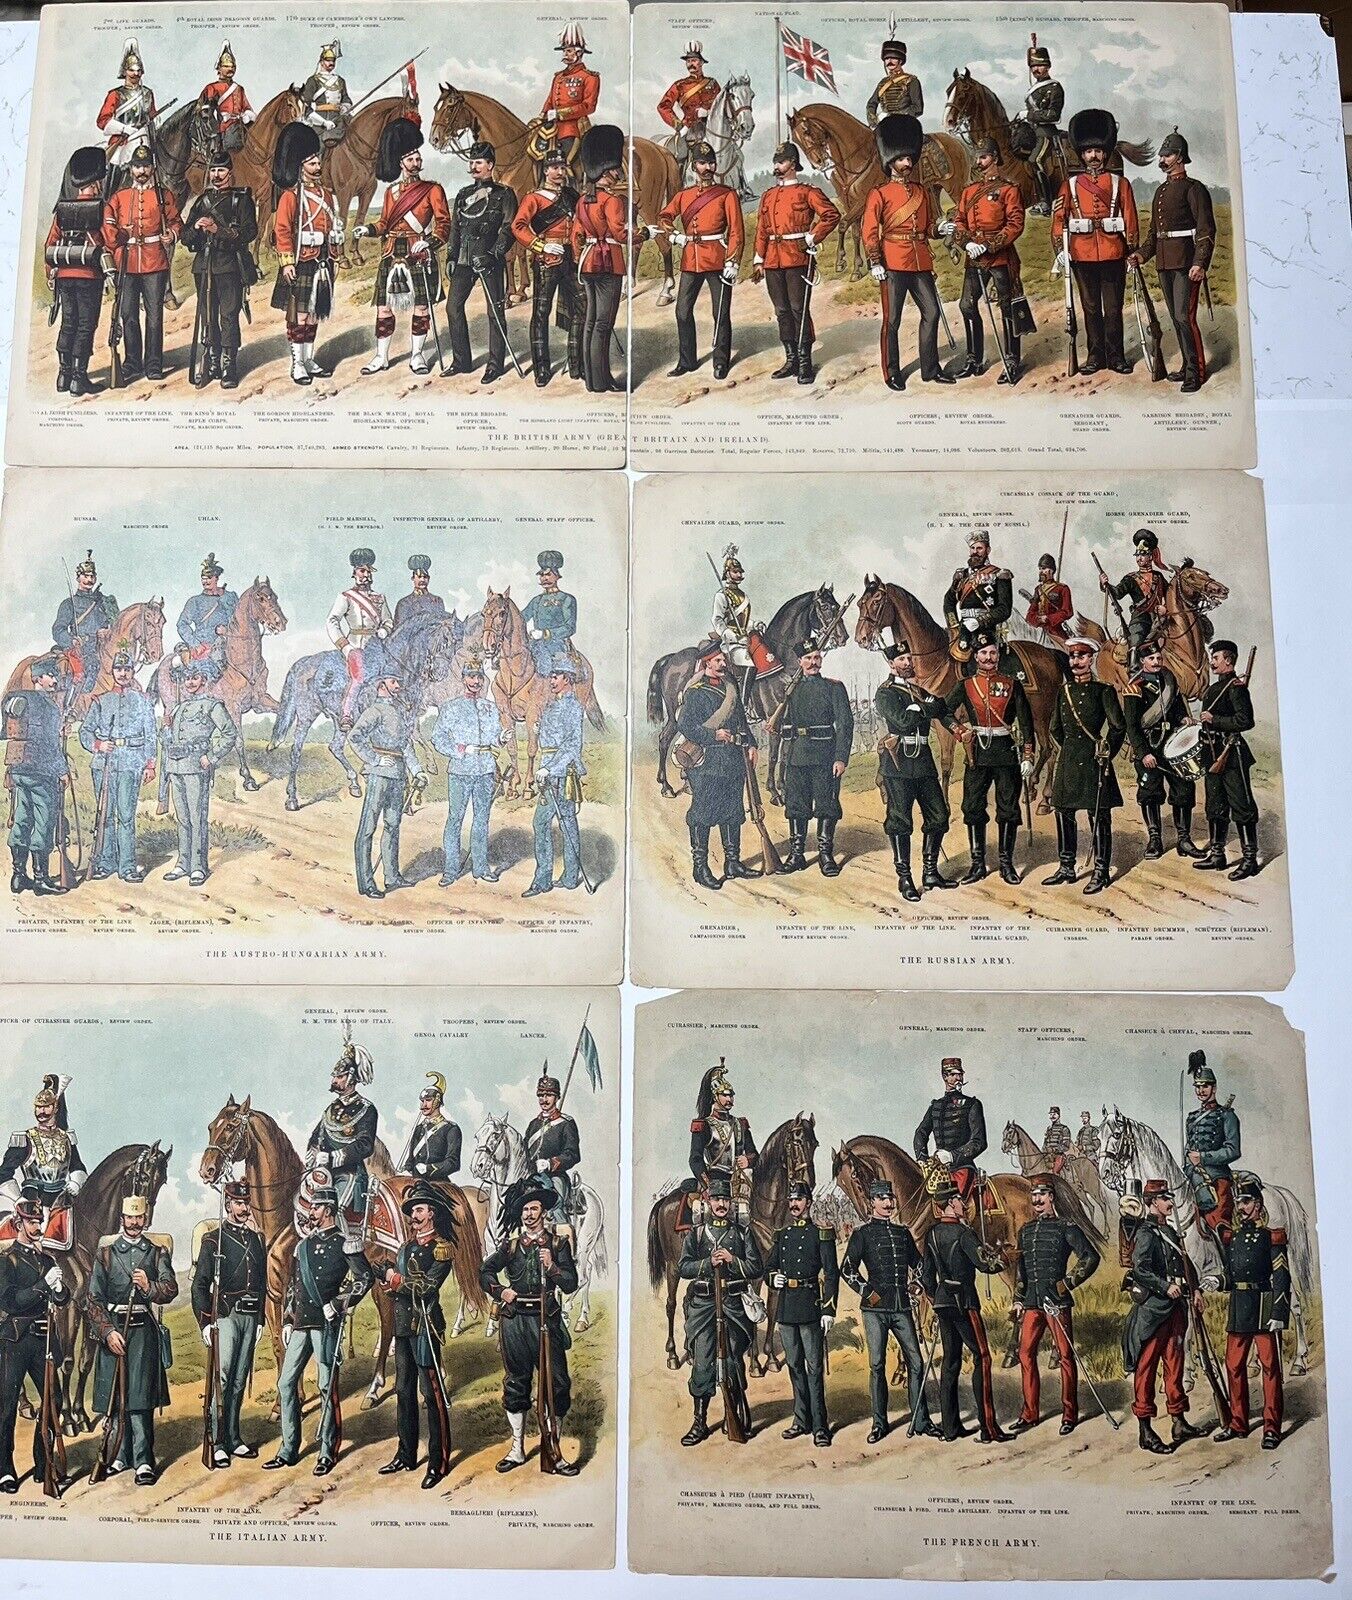 Color Prints Depicting European Armies From The Late 19th Century Pre WWI Era